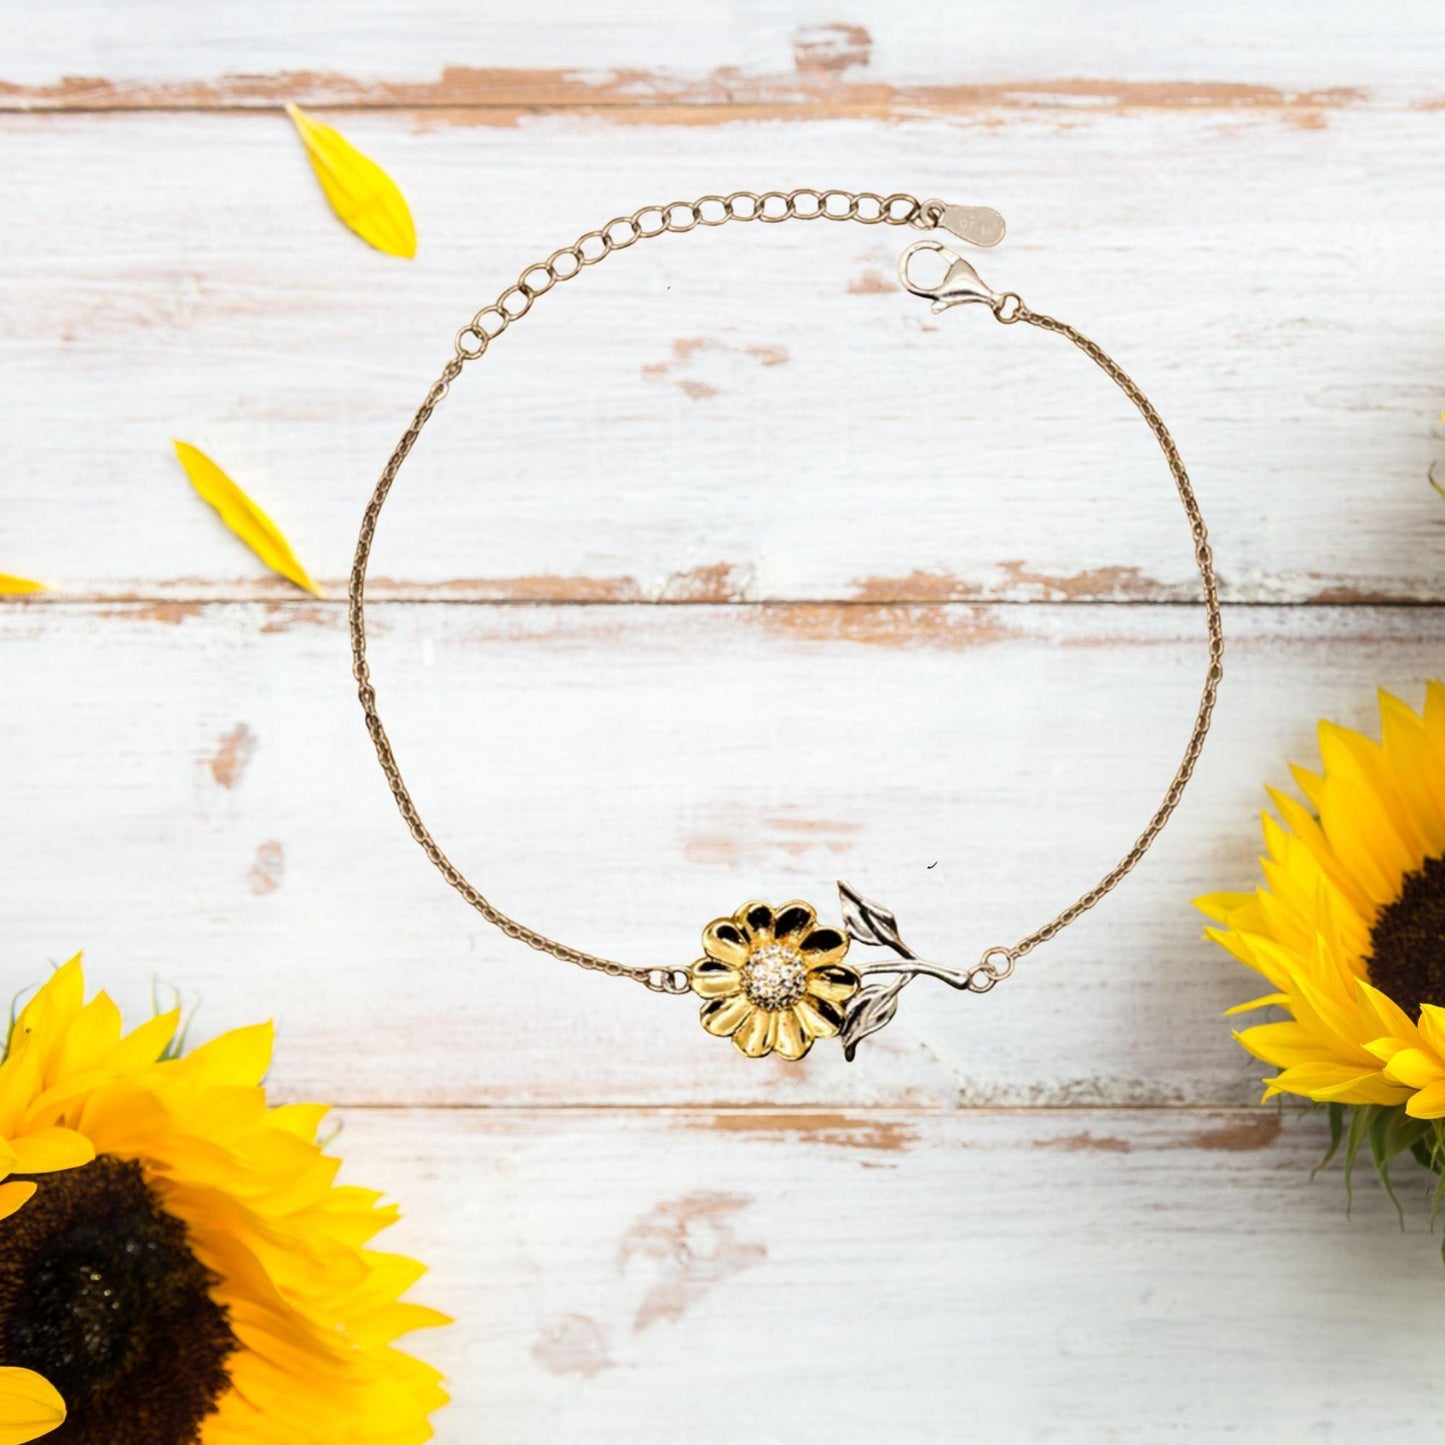 Motivational Single Mom Sunflower Bracelet- I can promise to love you for the rest of my life, Birthday, Christmas Holiday Jewelry Gift - Mallard Moon Gift Shop